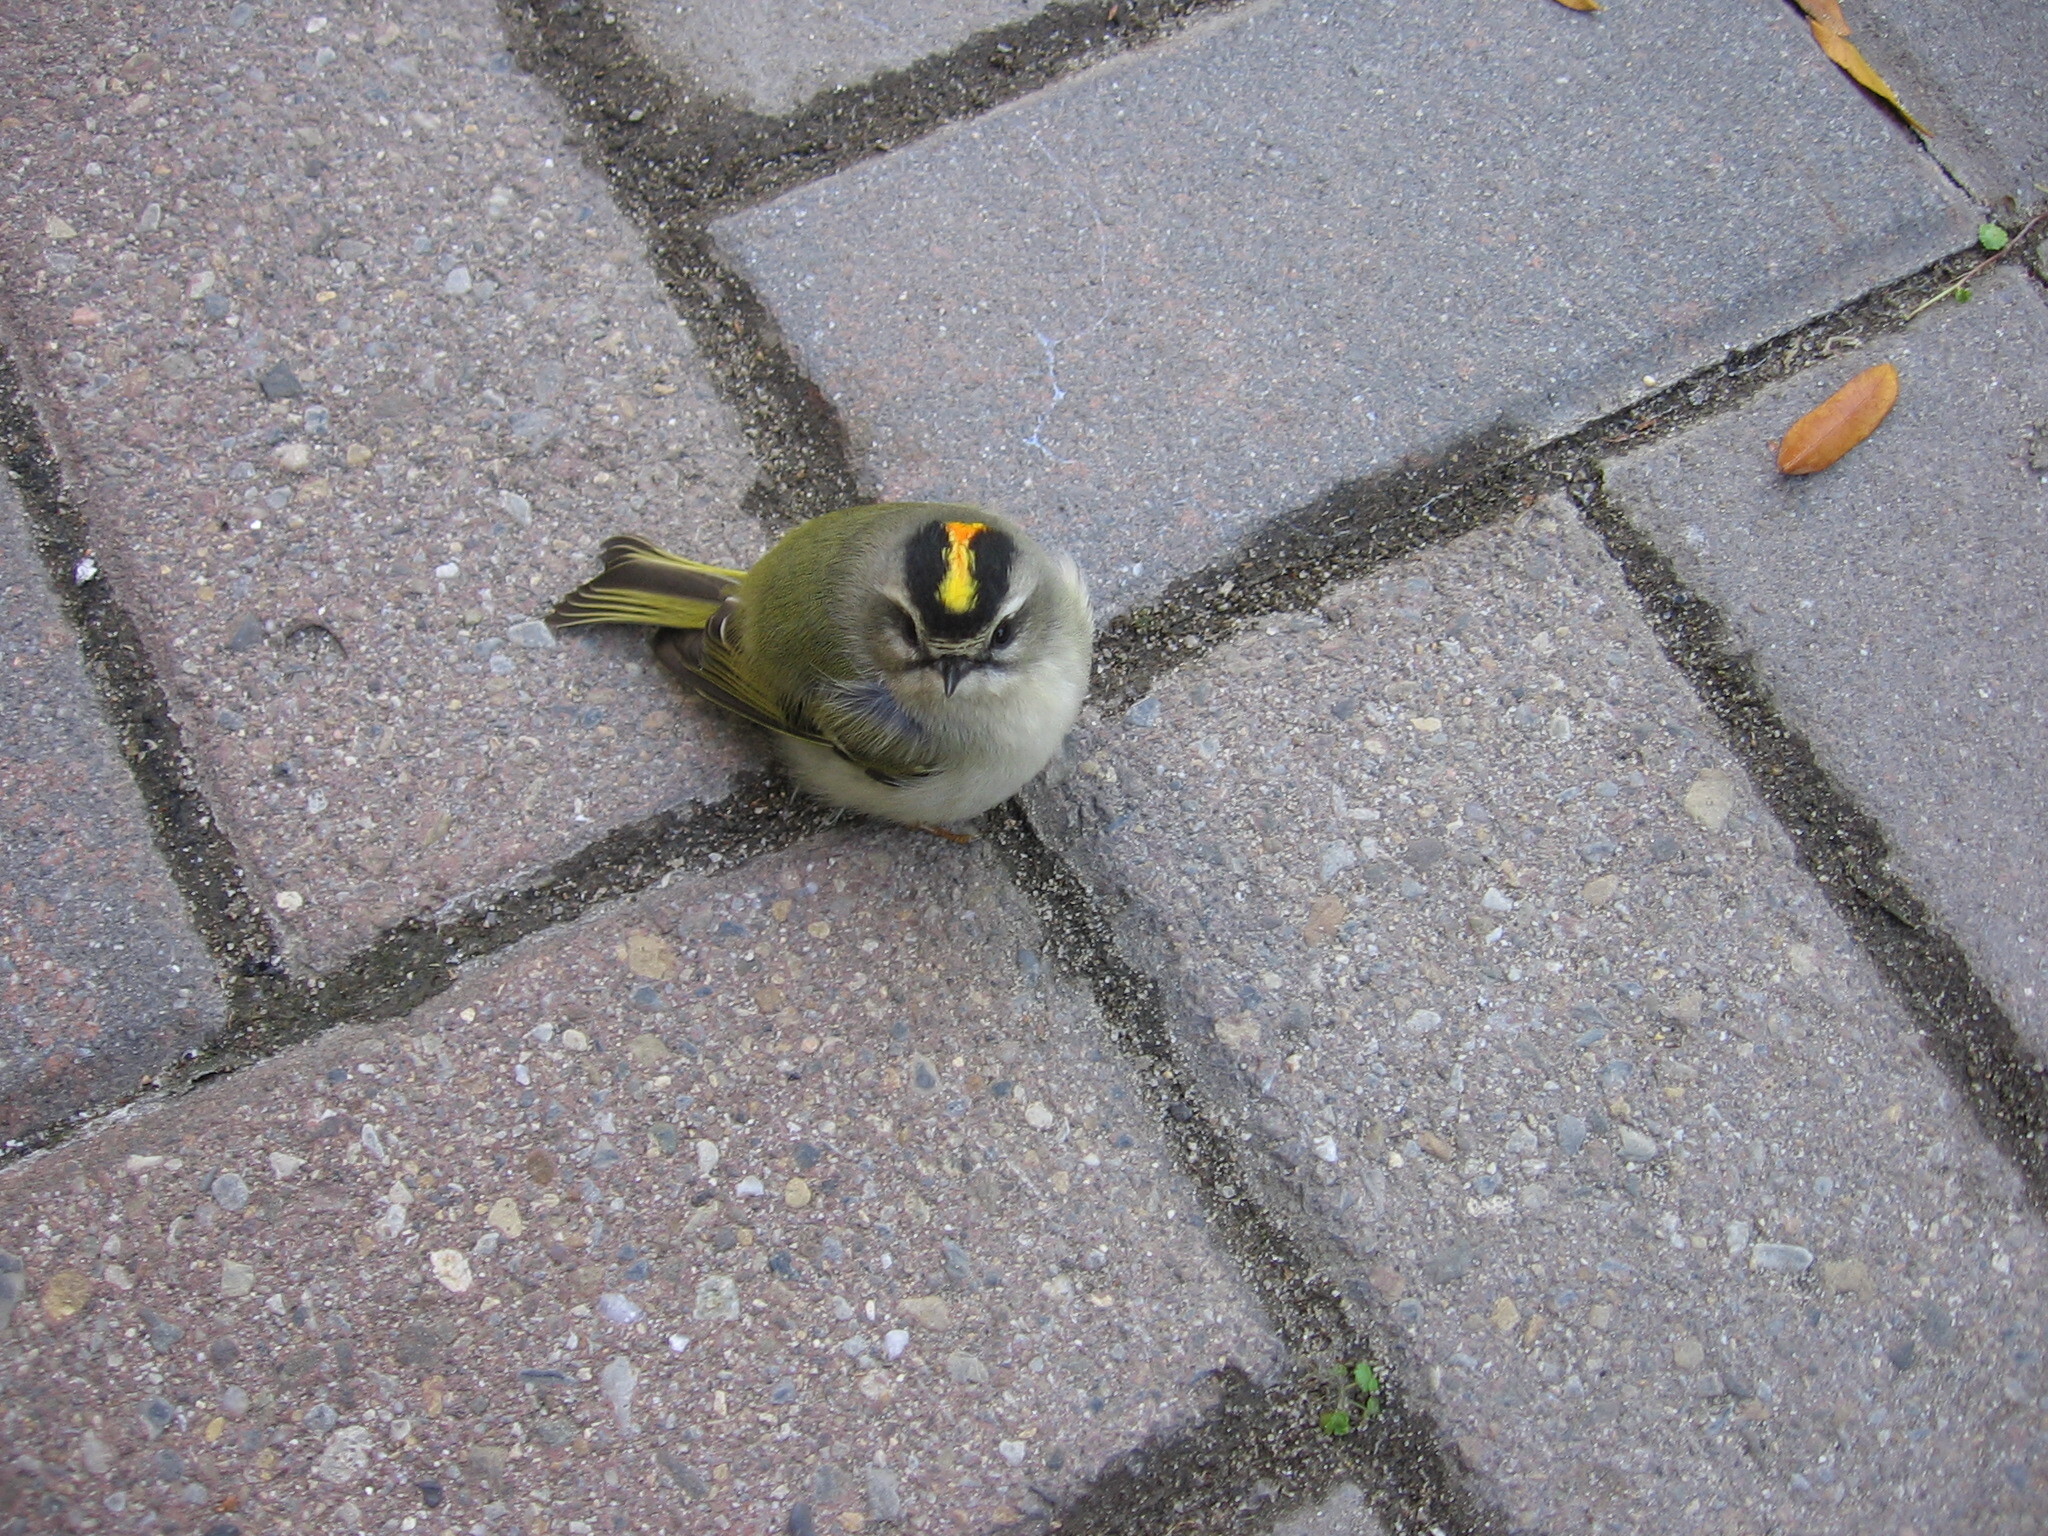 Injured Golden-crowned Kinglet in need of assistance. Photo: NYC Audubon